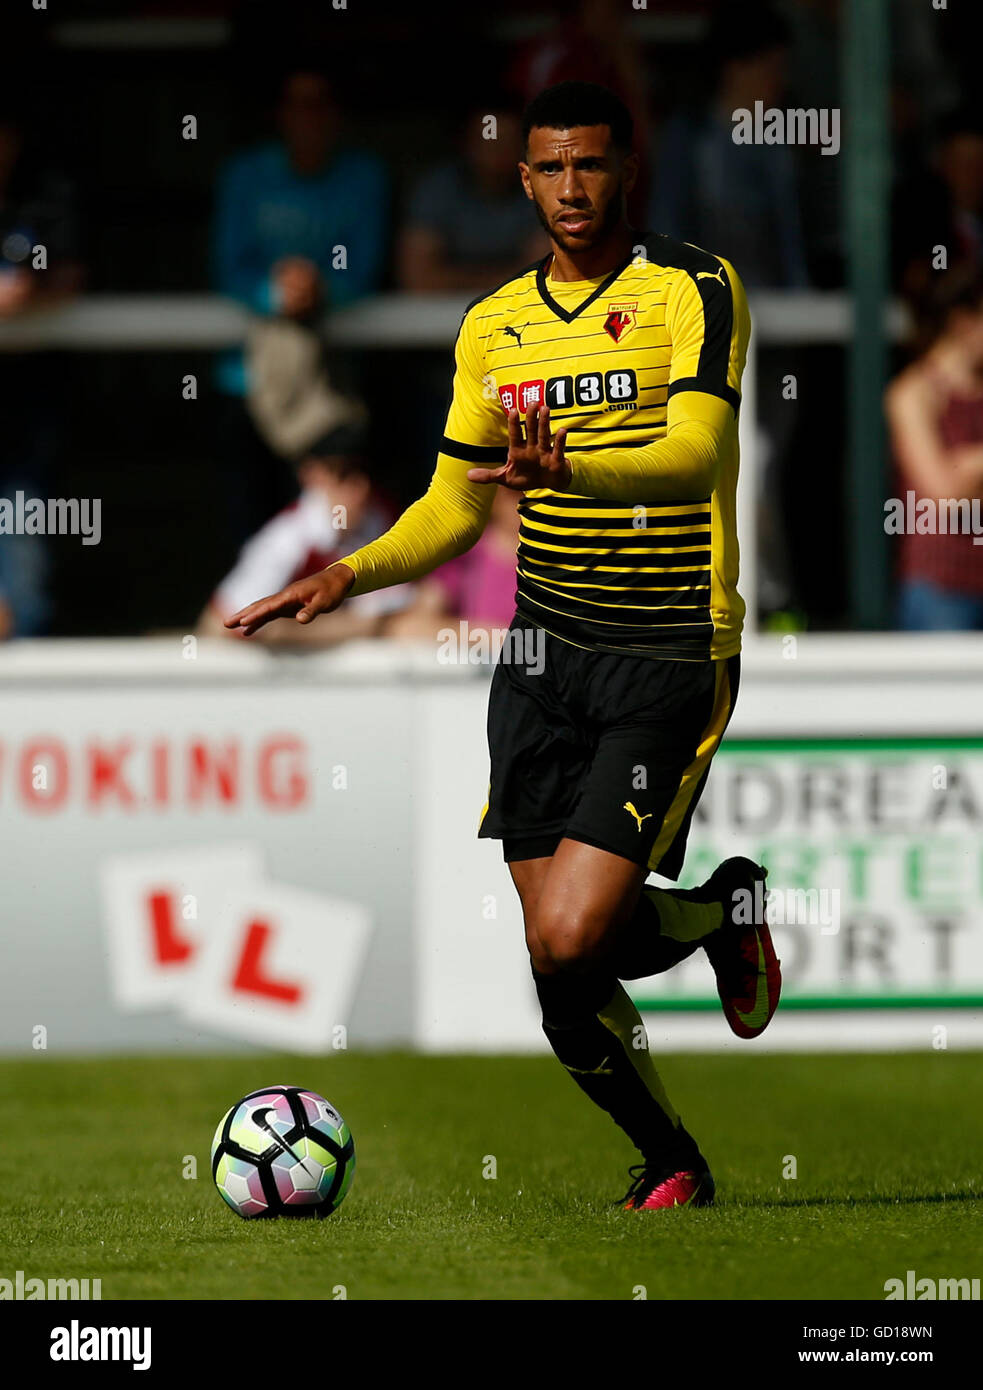 Watford's Etienne Capoue during the Pre-Season Friendly at the Kingfield Stadium, Woking. PRESS ASSOCIATION Photo. Picture date: Sunday July 10, 2016. Photo credit should read: Paul Harding/PA Wire. RESTRICTIONS: No use with unauthorised audio, video, data, fixture lists, club/league logos or 'live' services. Online in-match use limited to 75 images, no video emulation. No use in betting, games or single club/league/player publications. Stock Photo